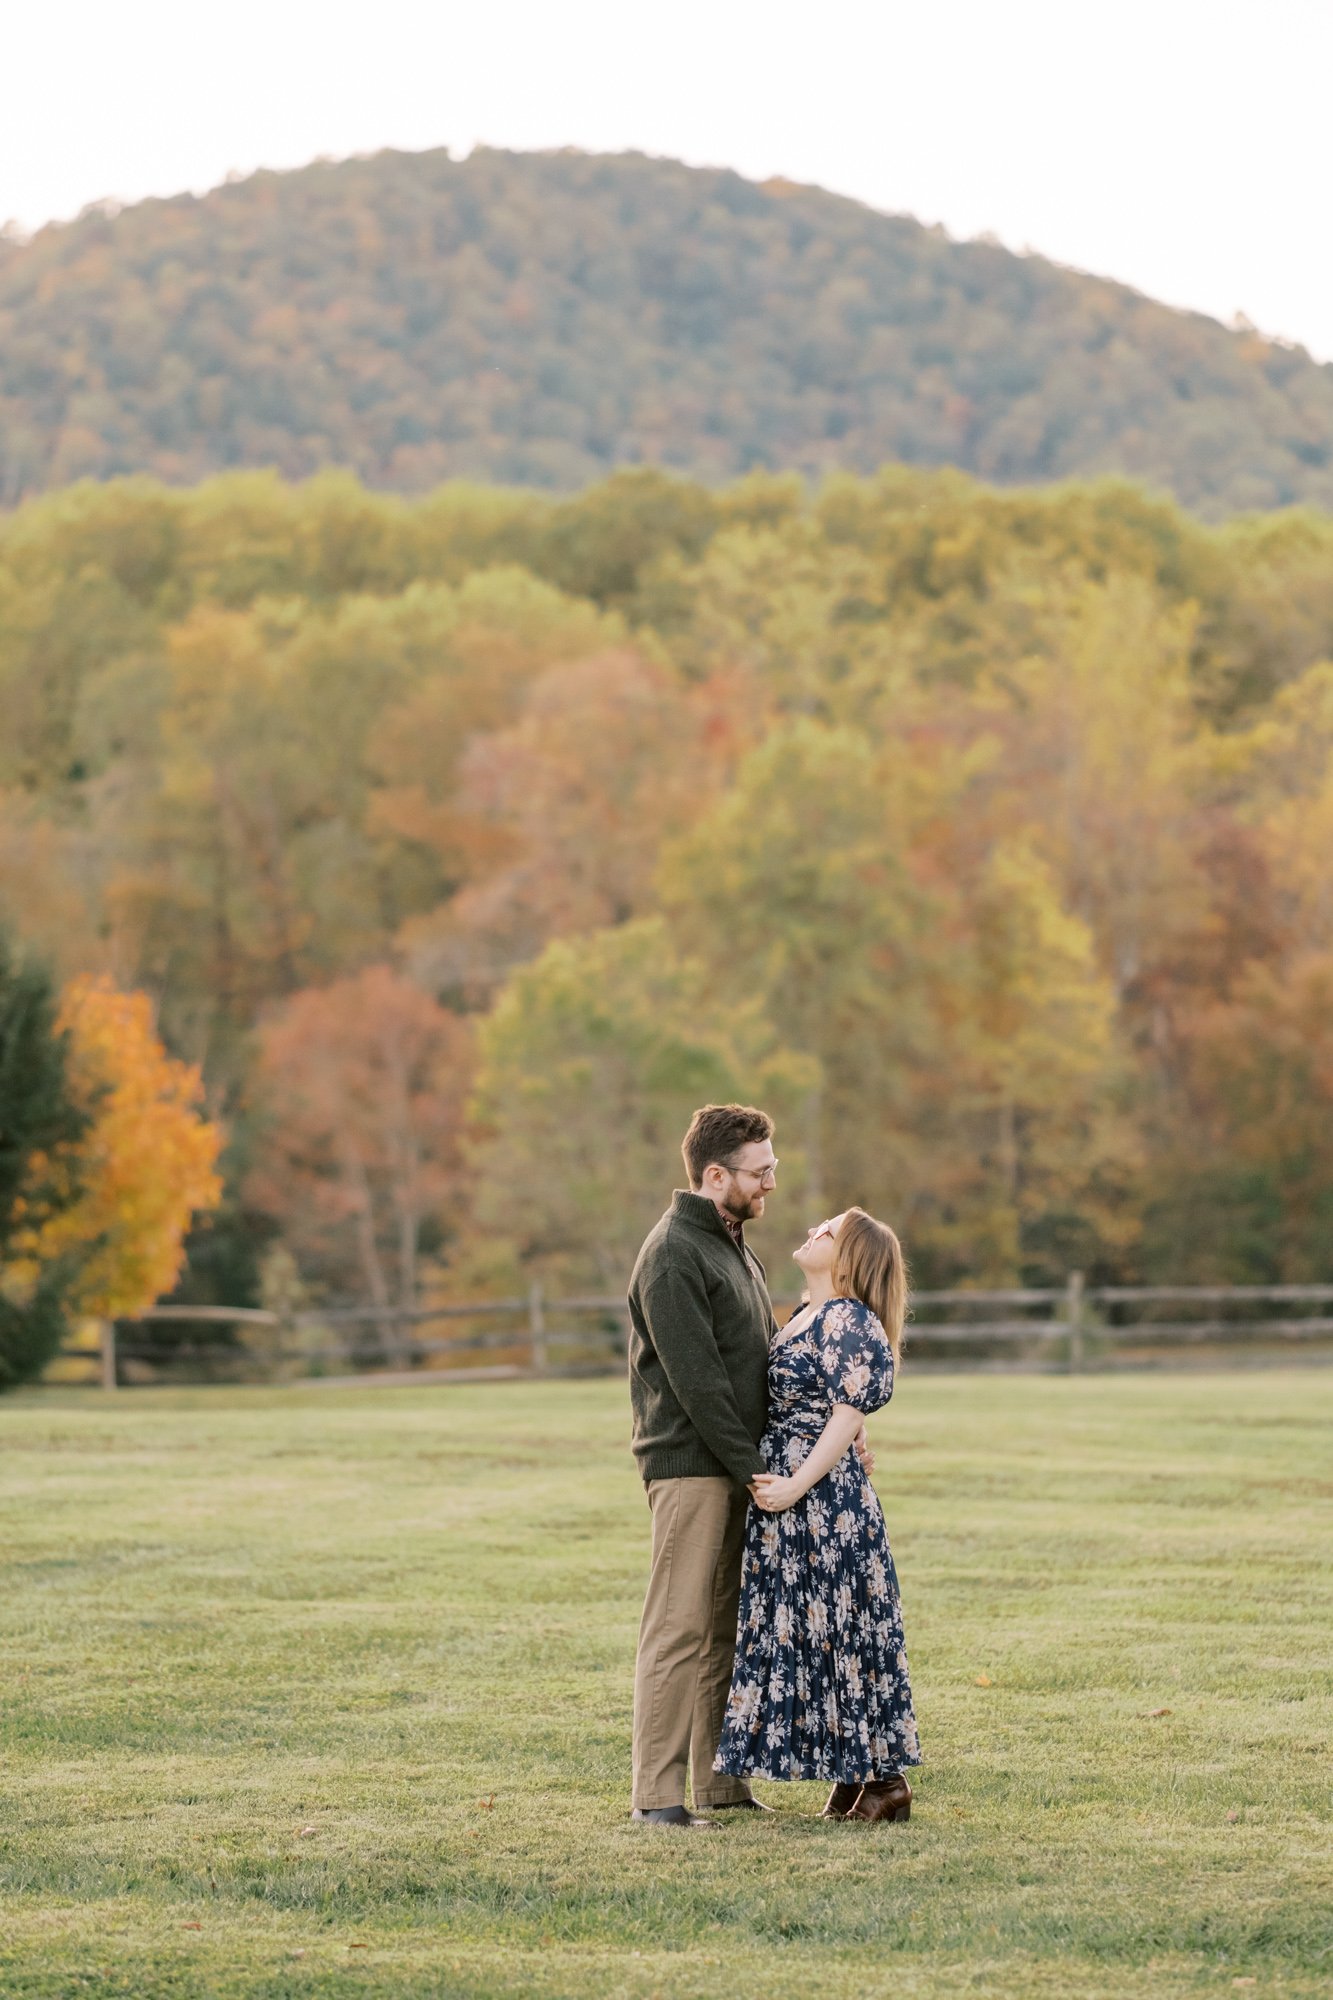 Engagement couple portrait with mountain in background at The Inn at Little Washington